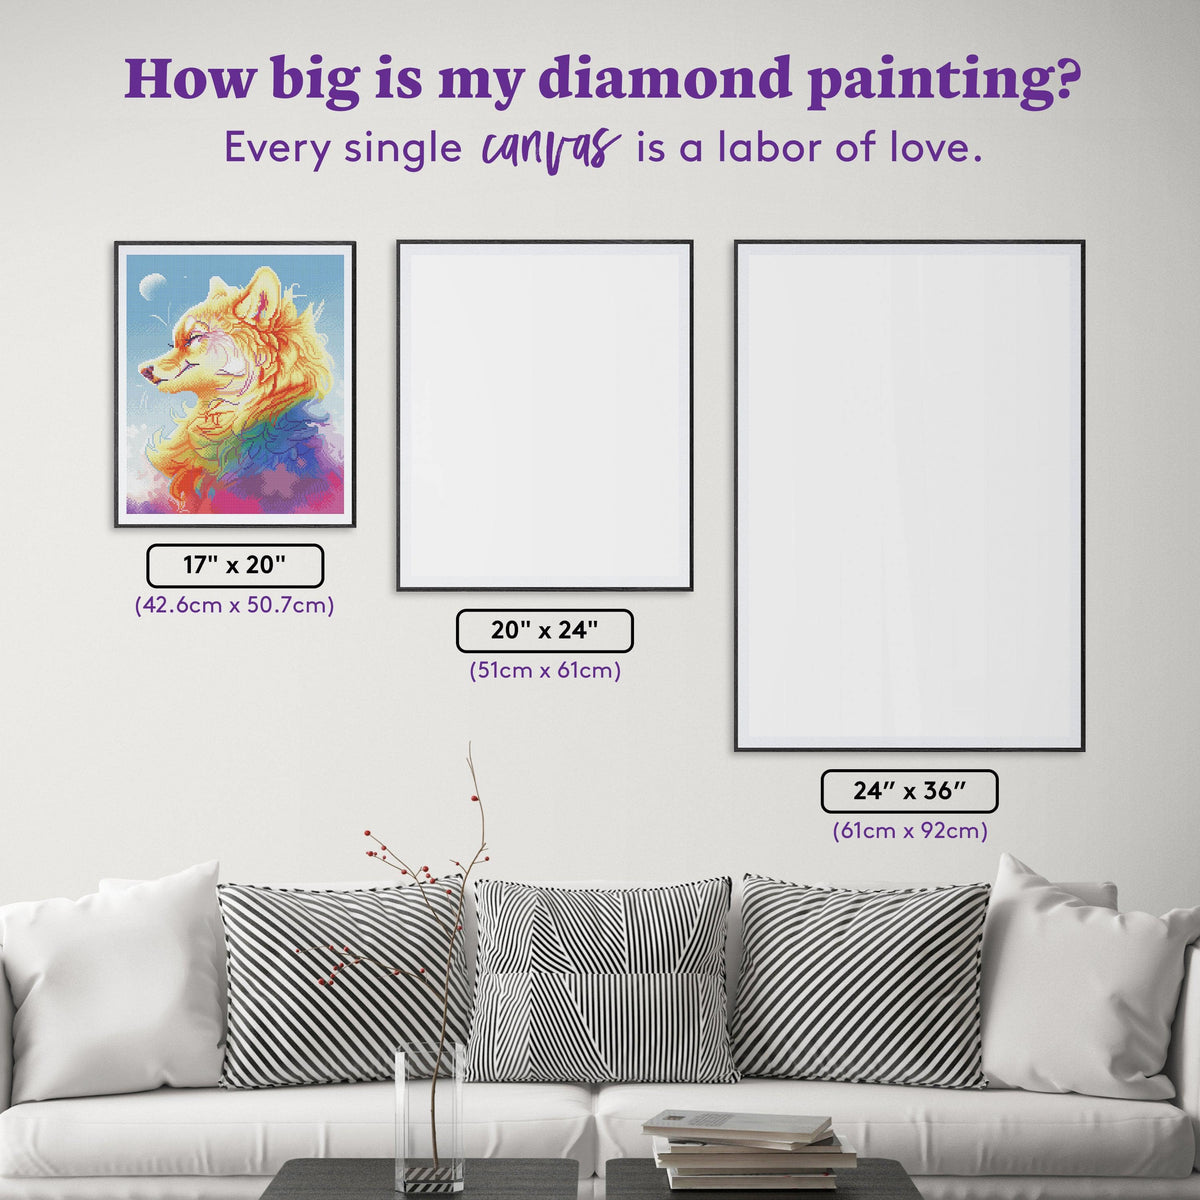 Diamond Painting Daylight 17" x 20" (42.6cm x 50.7cm) / Round With 51 Colors Including 2 ABs and 1 Fairy Dust Diamonds / 27,512